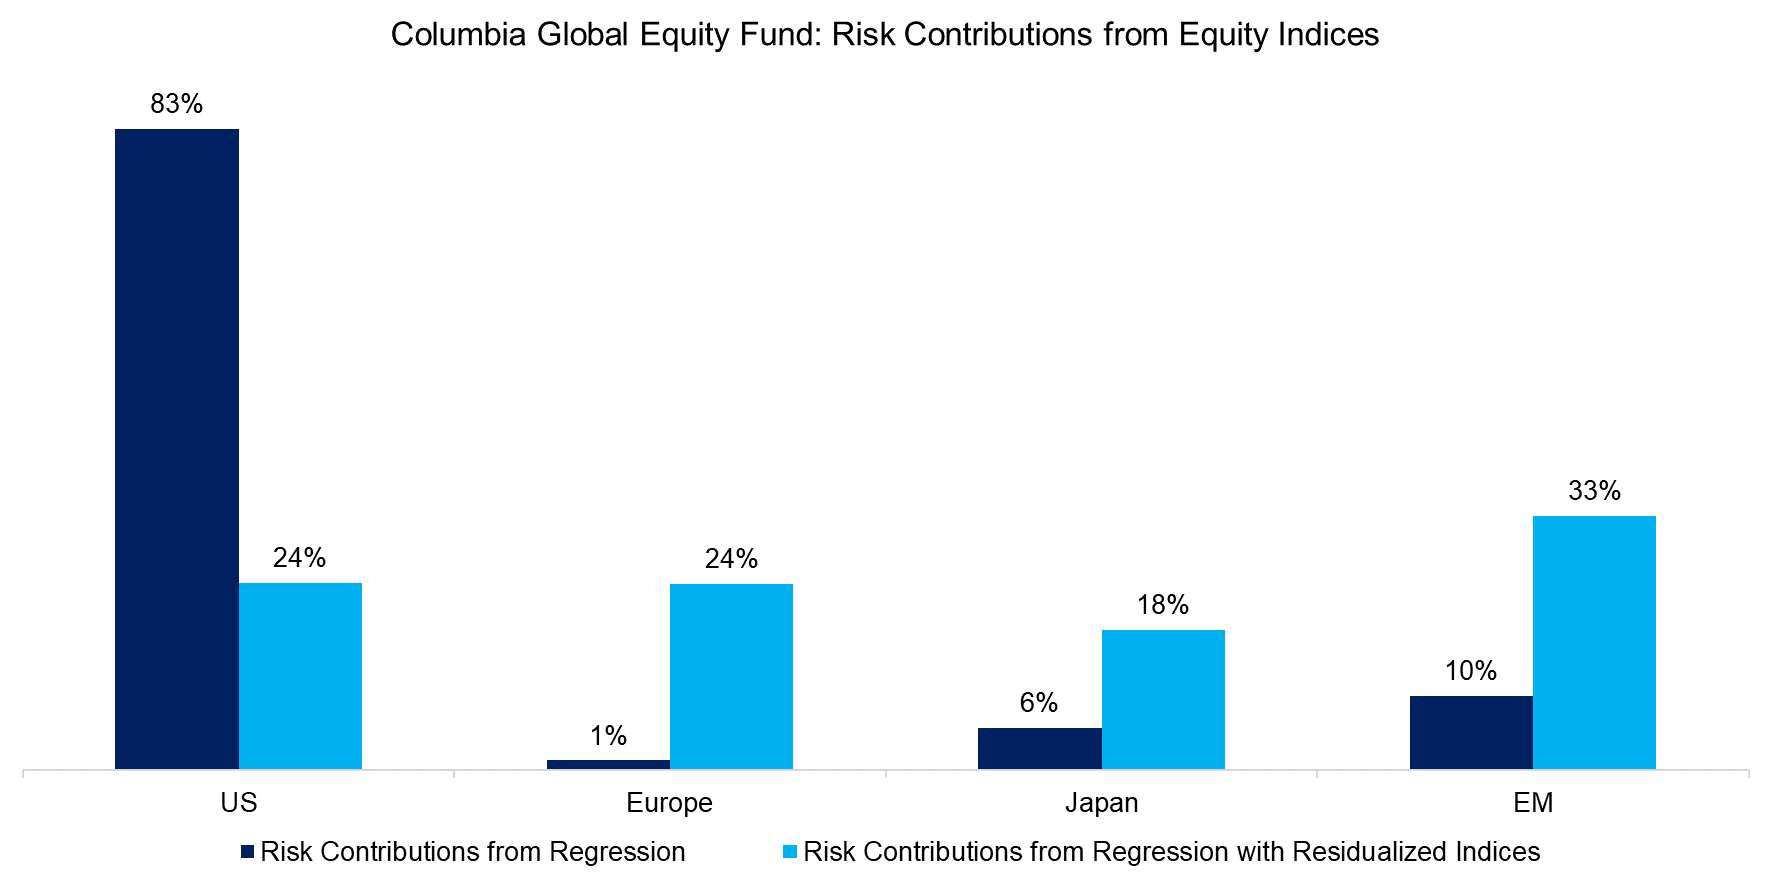 Columbia Global Equity Fund Risk Contributions from Equity Indices